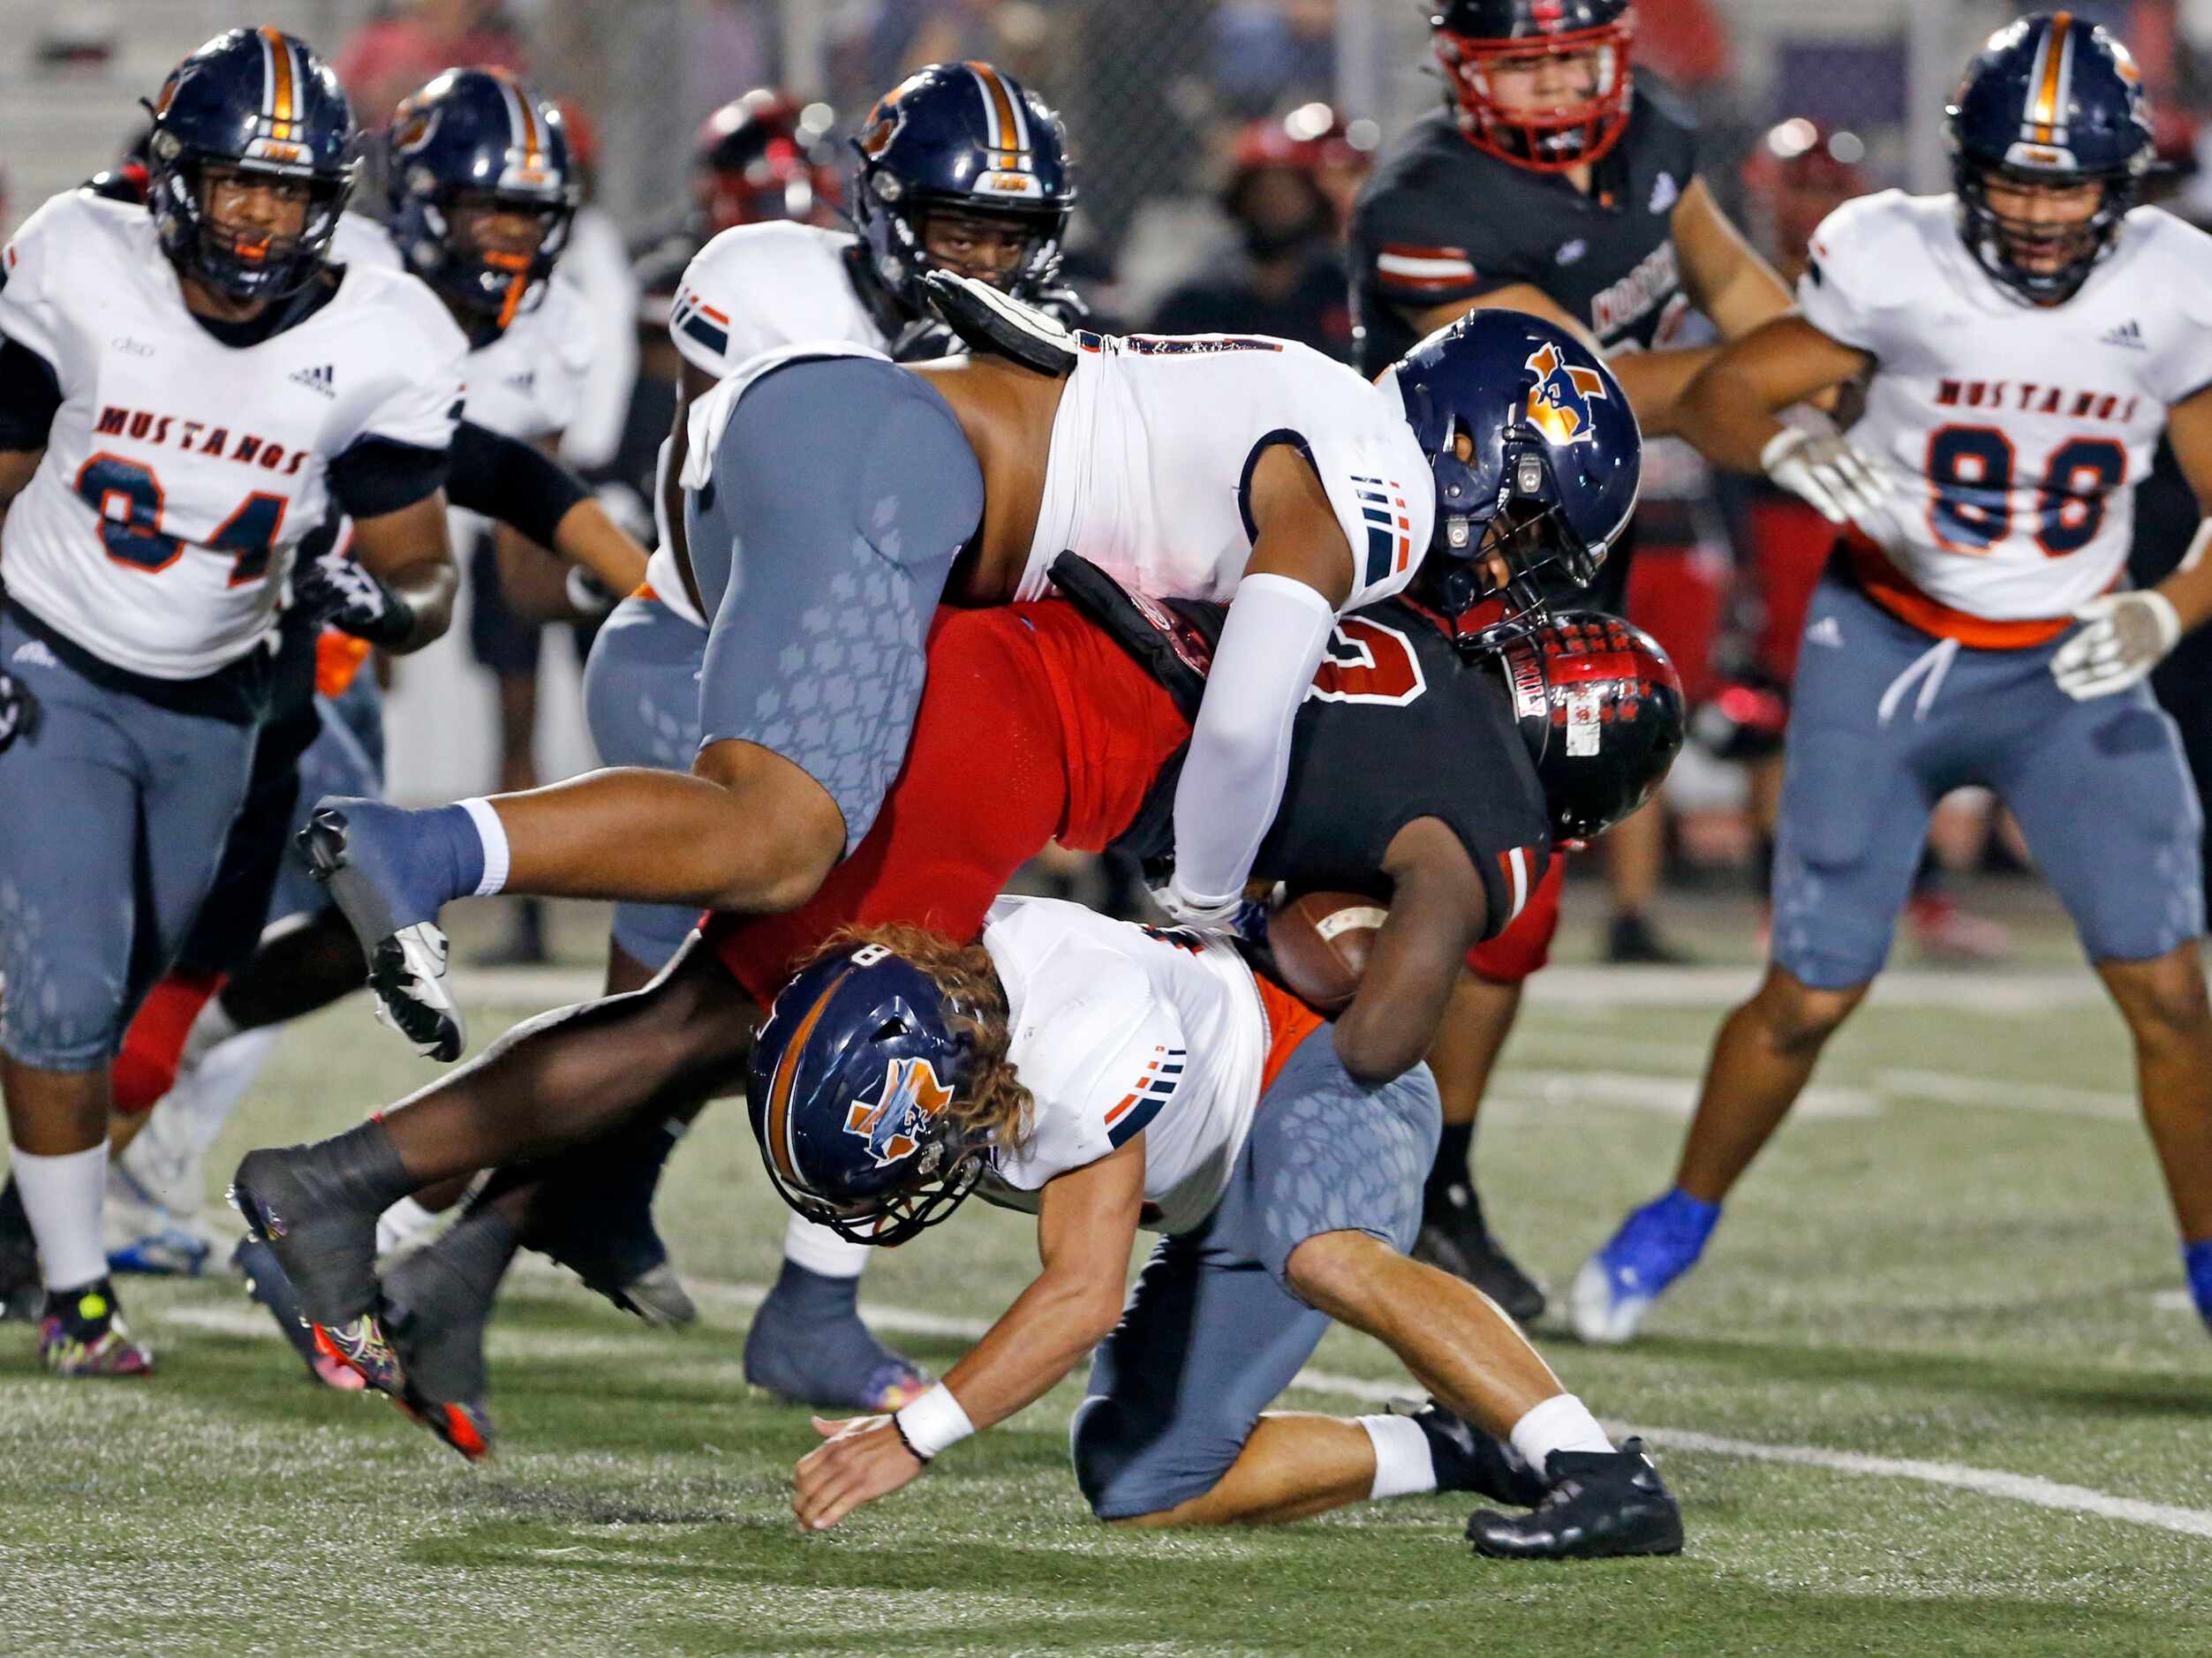 North Garland RB Jayden Davis (13) id sandwiched by two Sachse High defenders during the...